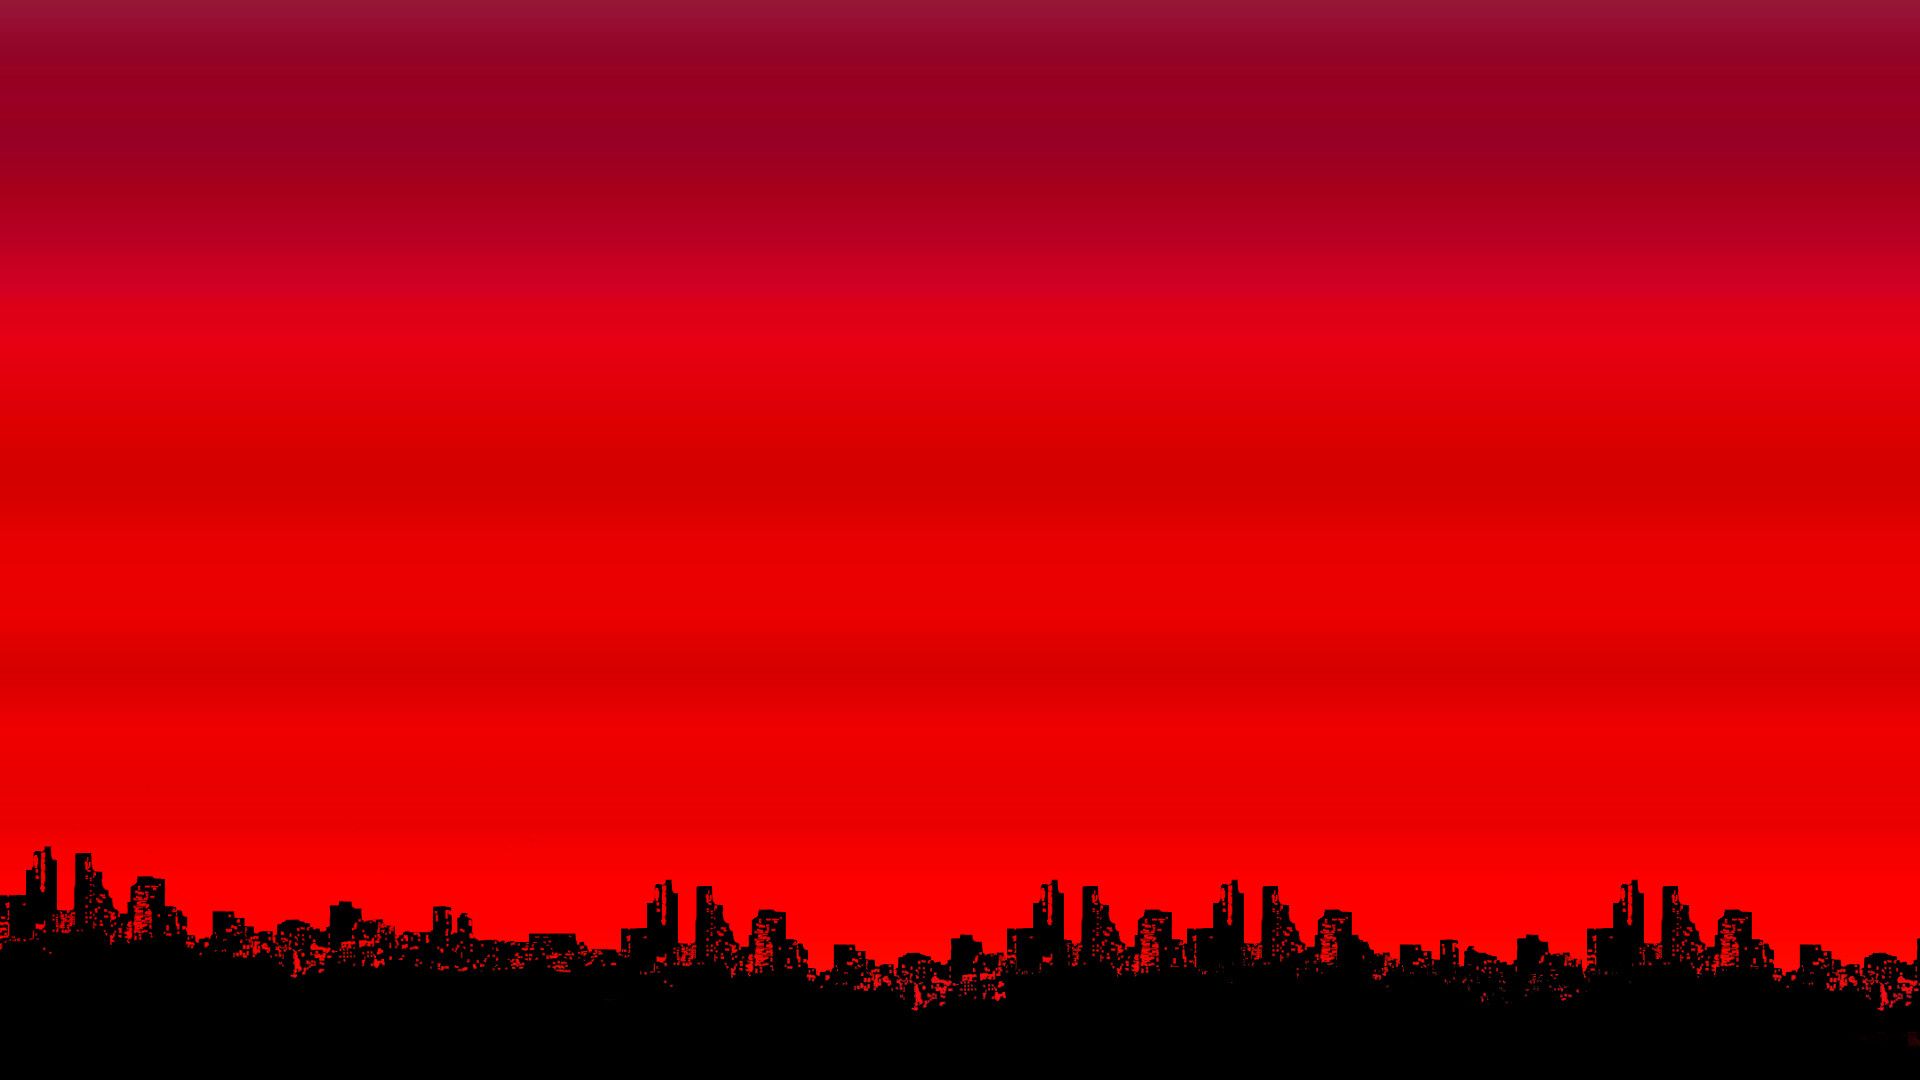 Aesthetic Red PC Wallpaper